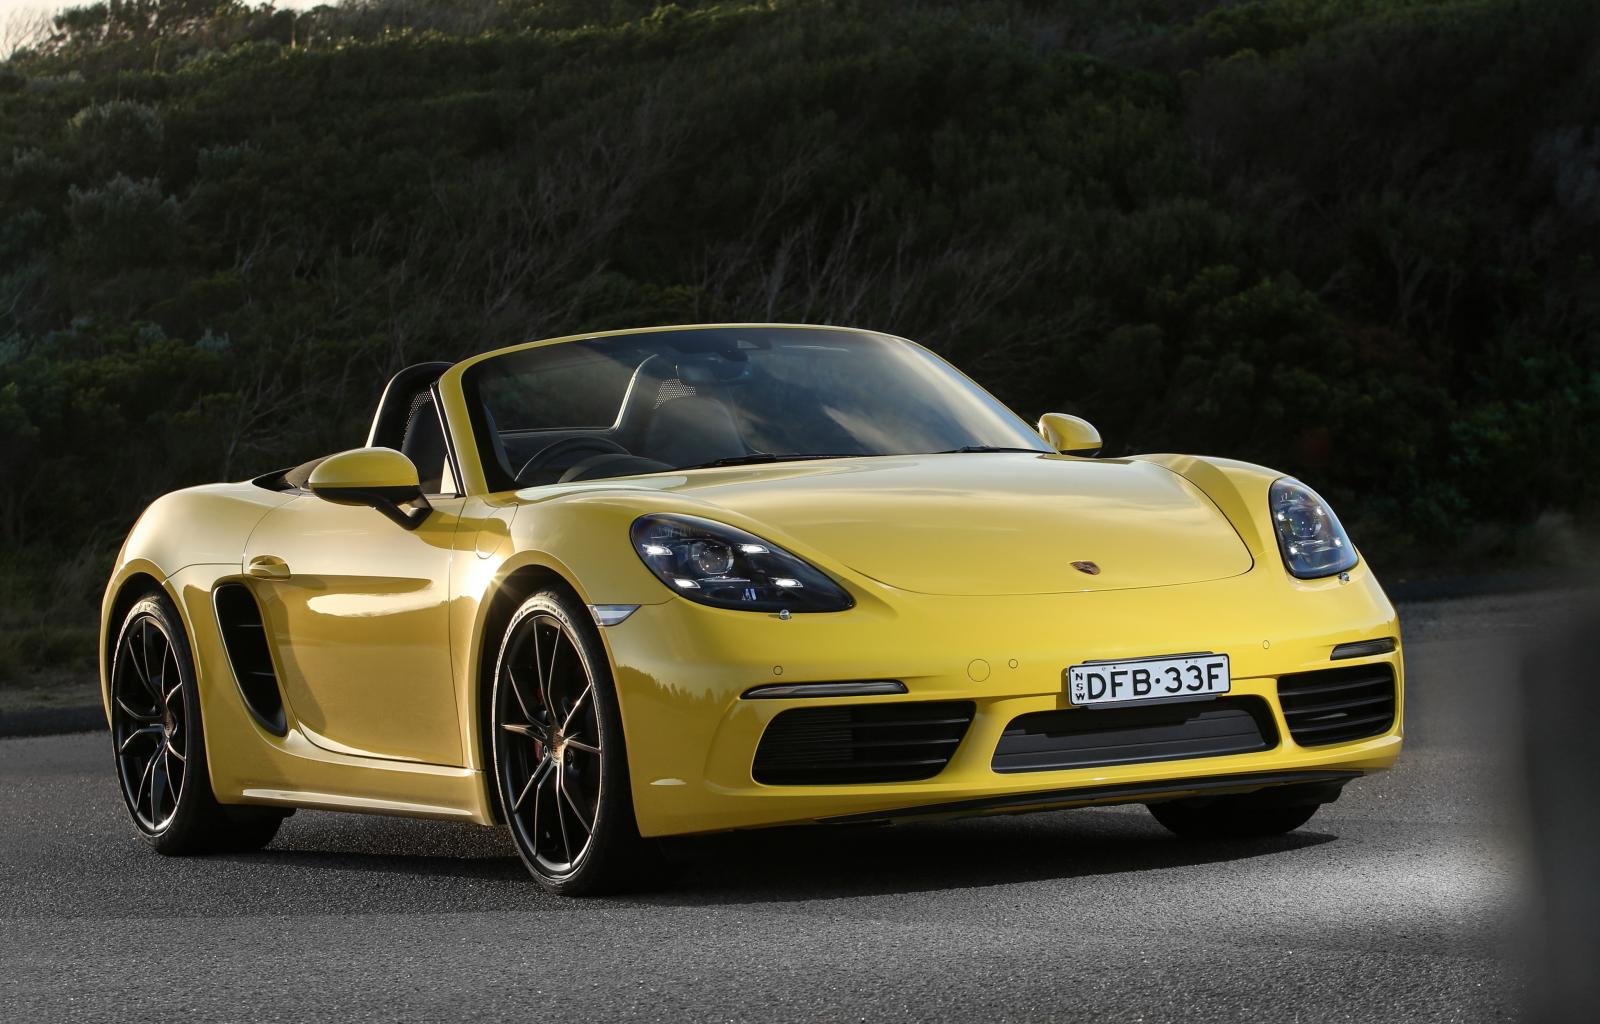 Awesome Porsche Boxster free wallpaper ID:359530 for hd 1600x1024 computer